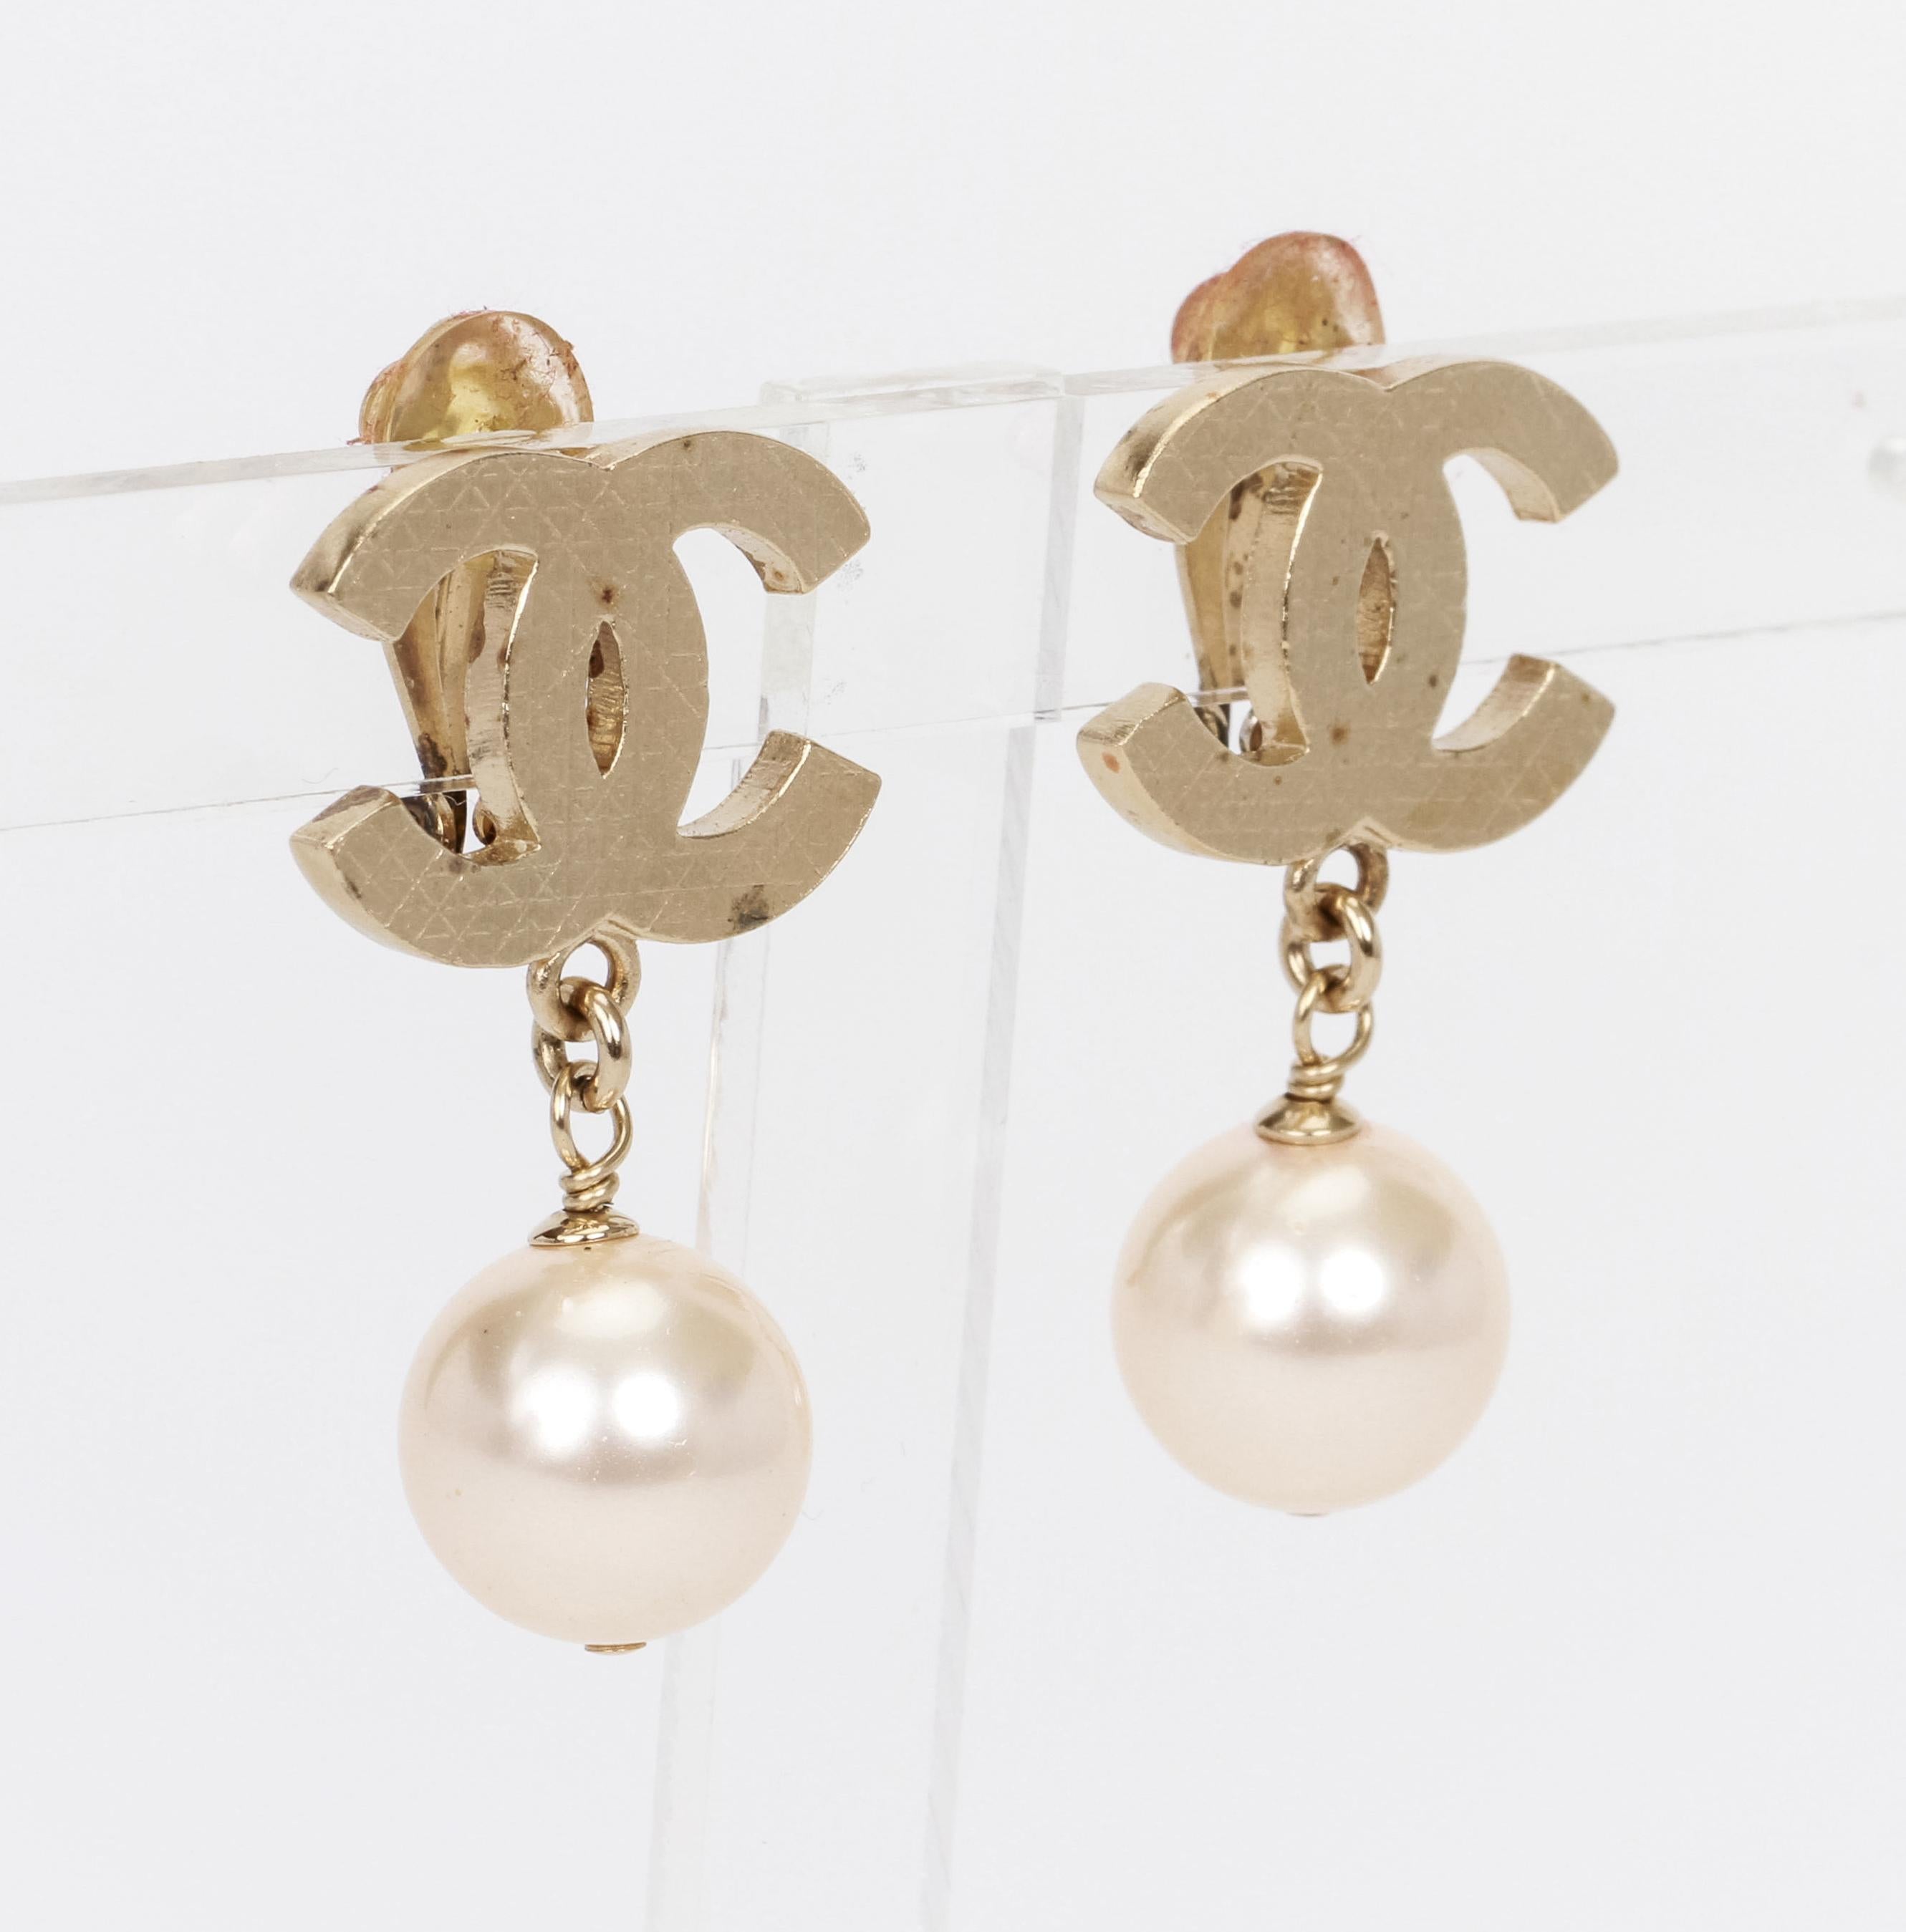 Chanel spring 2017 gold cc clip earrings with gripoix pearl dangle, minor spots on the gold, L 1 1/8